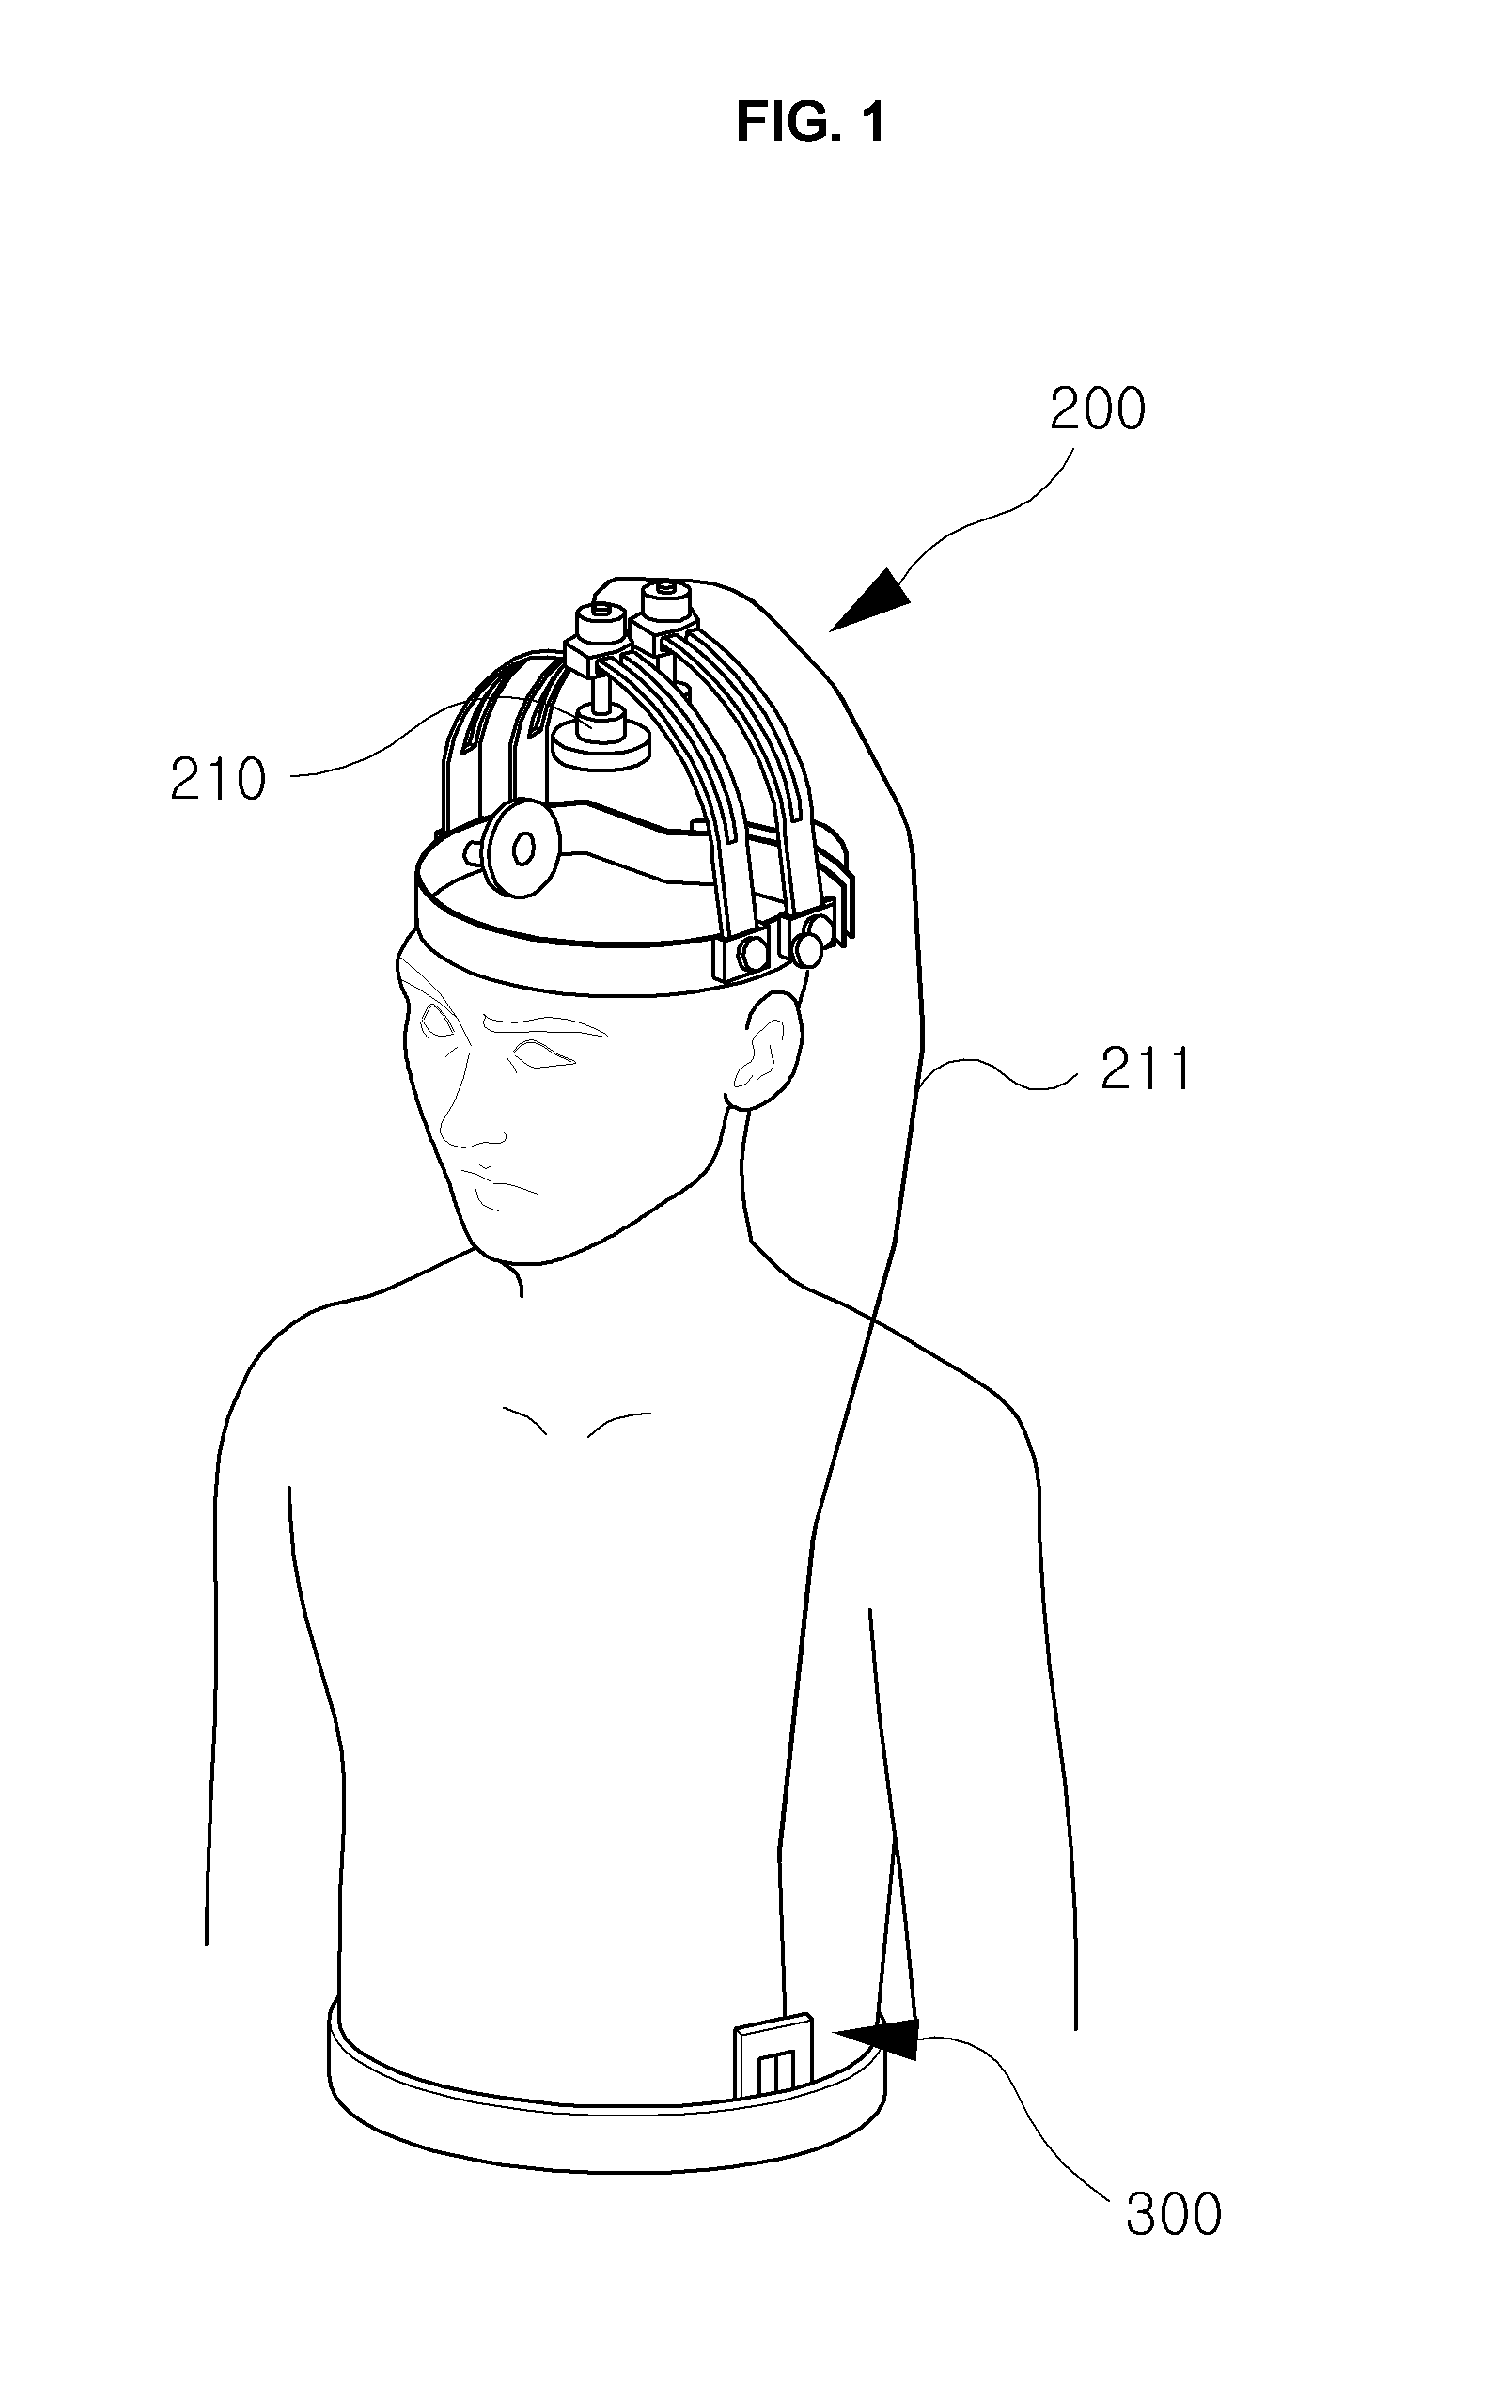 Implantable cortical electrical stimulation appratus having wireless power supply control function